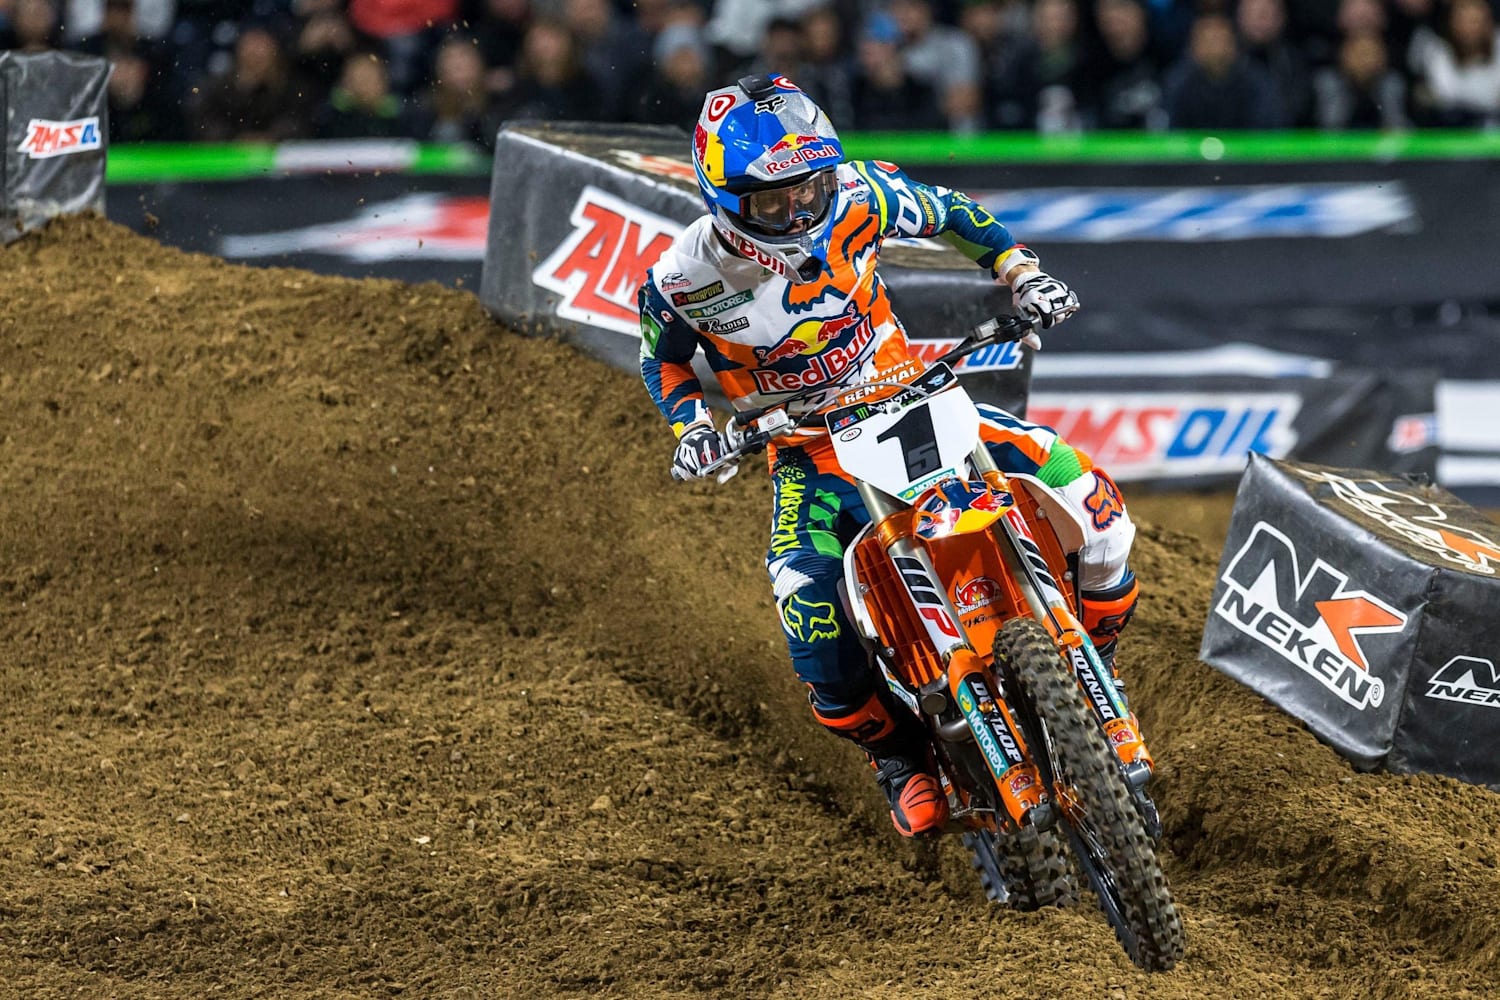 8 Photos of Supercross Riders Doing What They Do Best